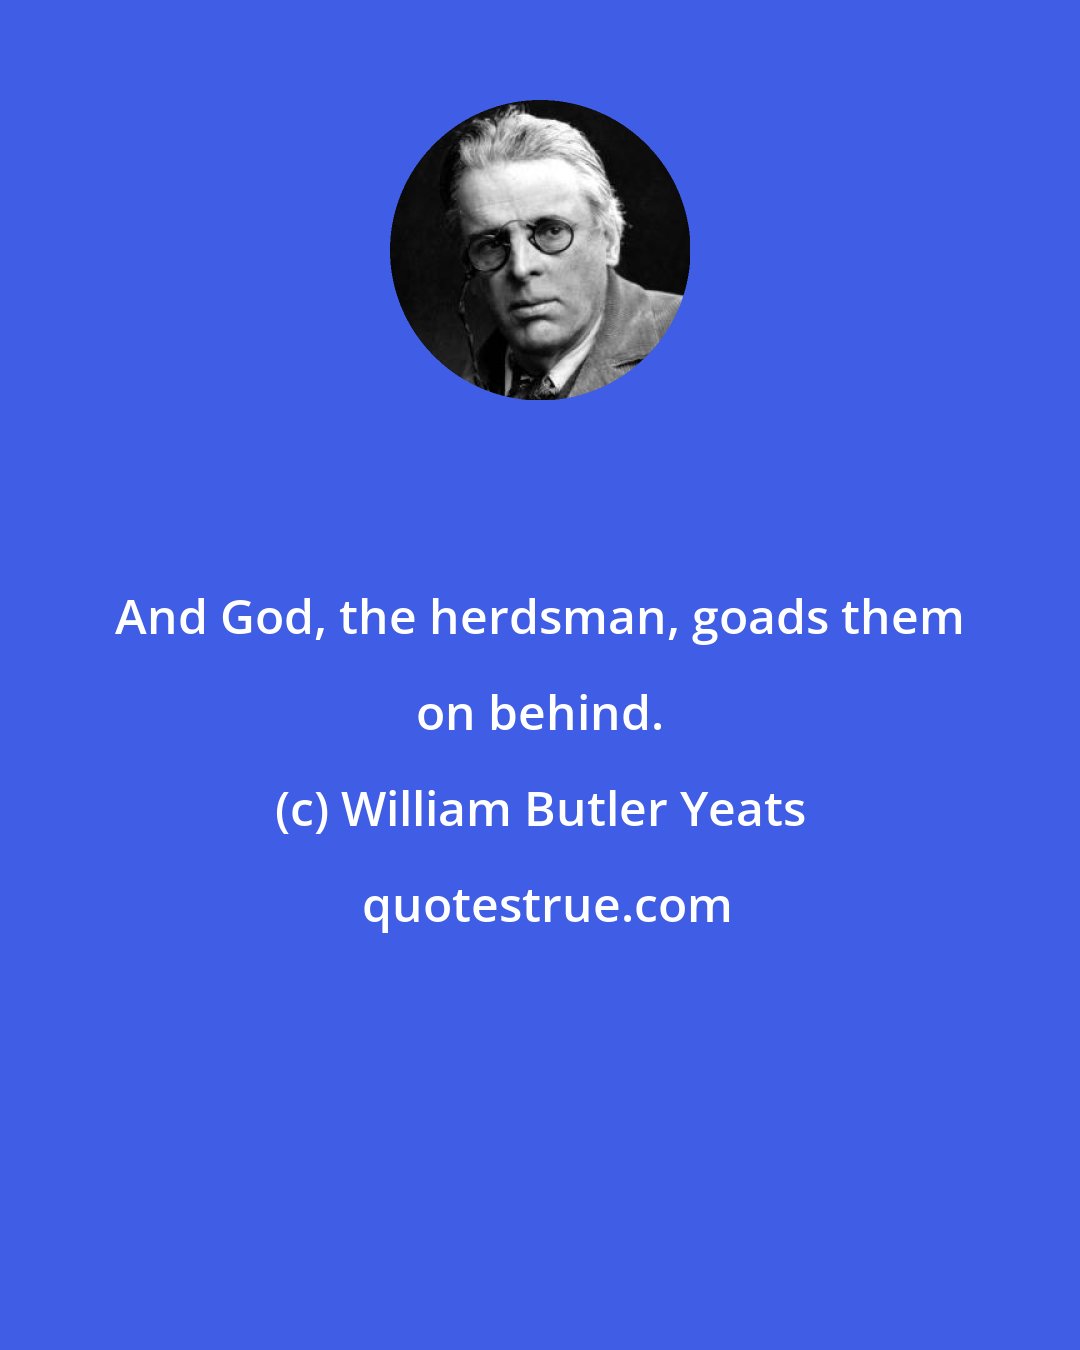 William Butler Yeats: And God, the herdsman, goads them on behind.